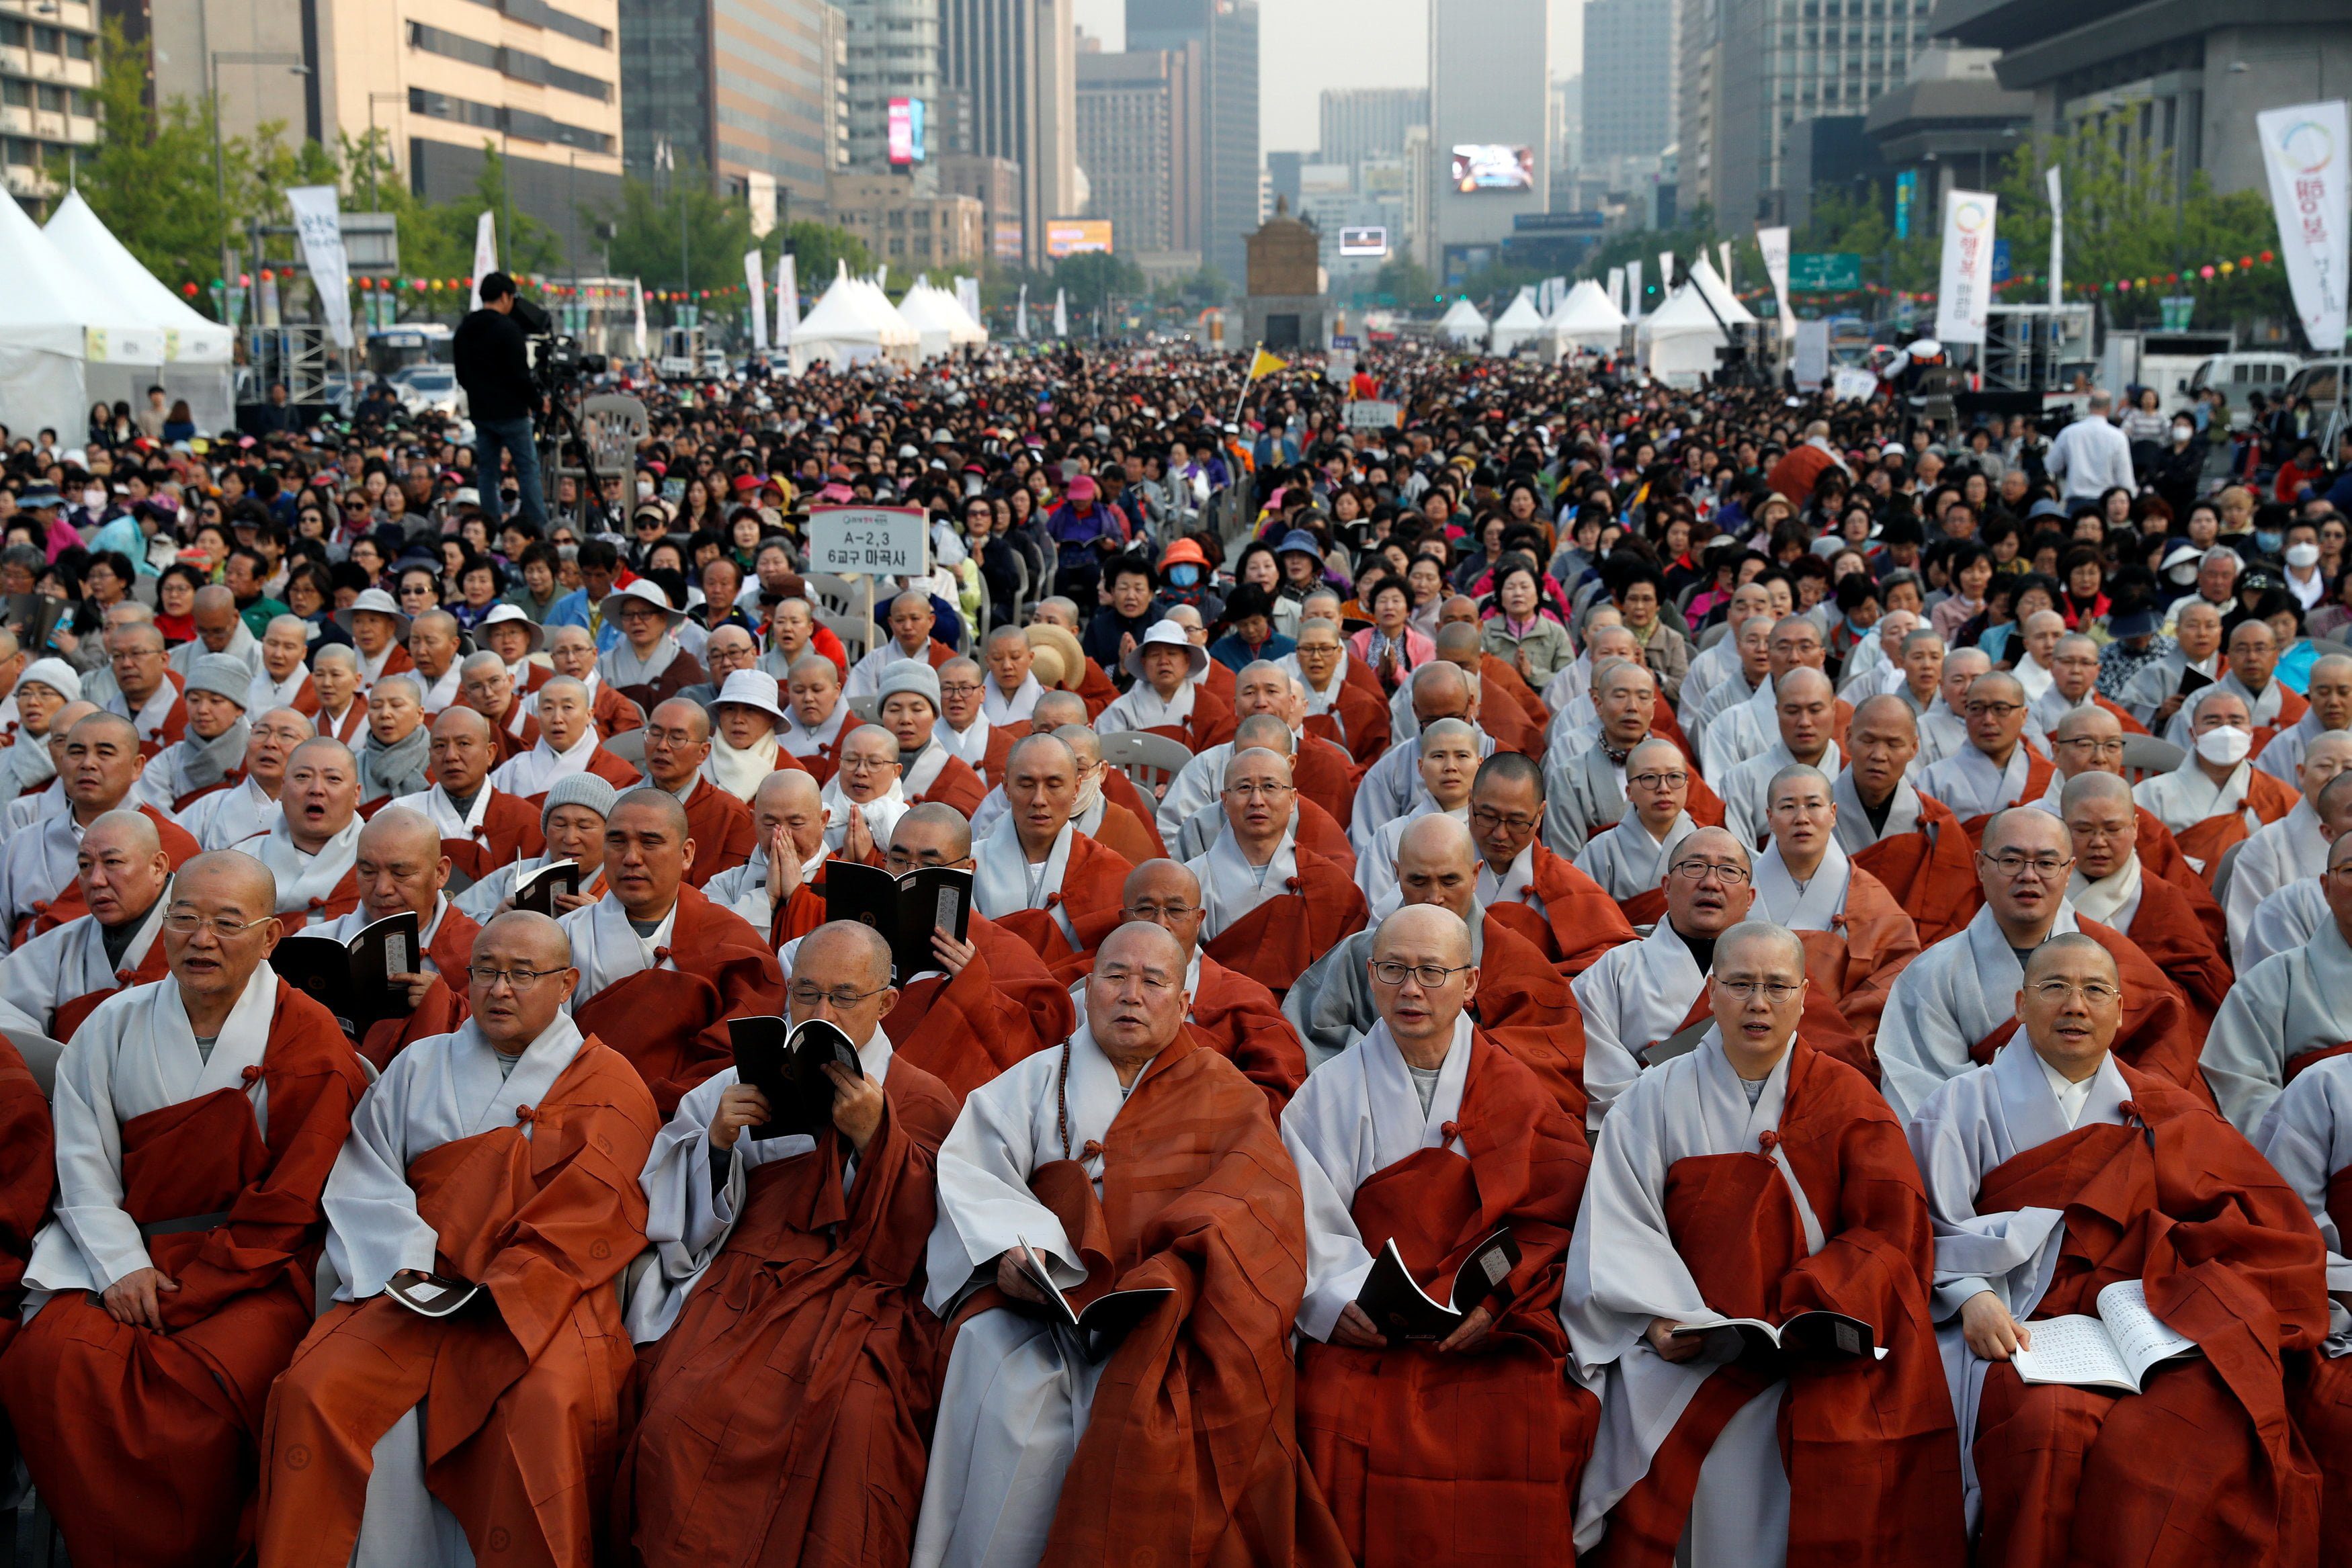 Buddhist monks, nuns and people attend a prayer service wishing for a successful inter-Korean summit in Seoul, South Korea